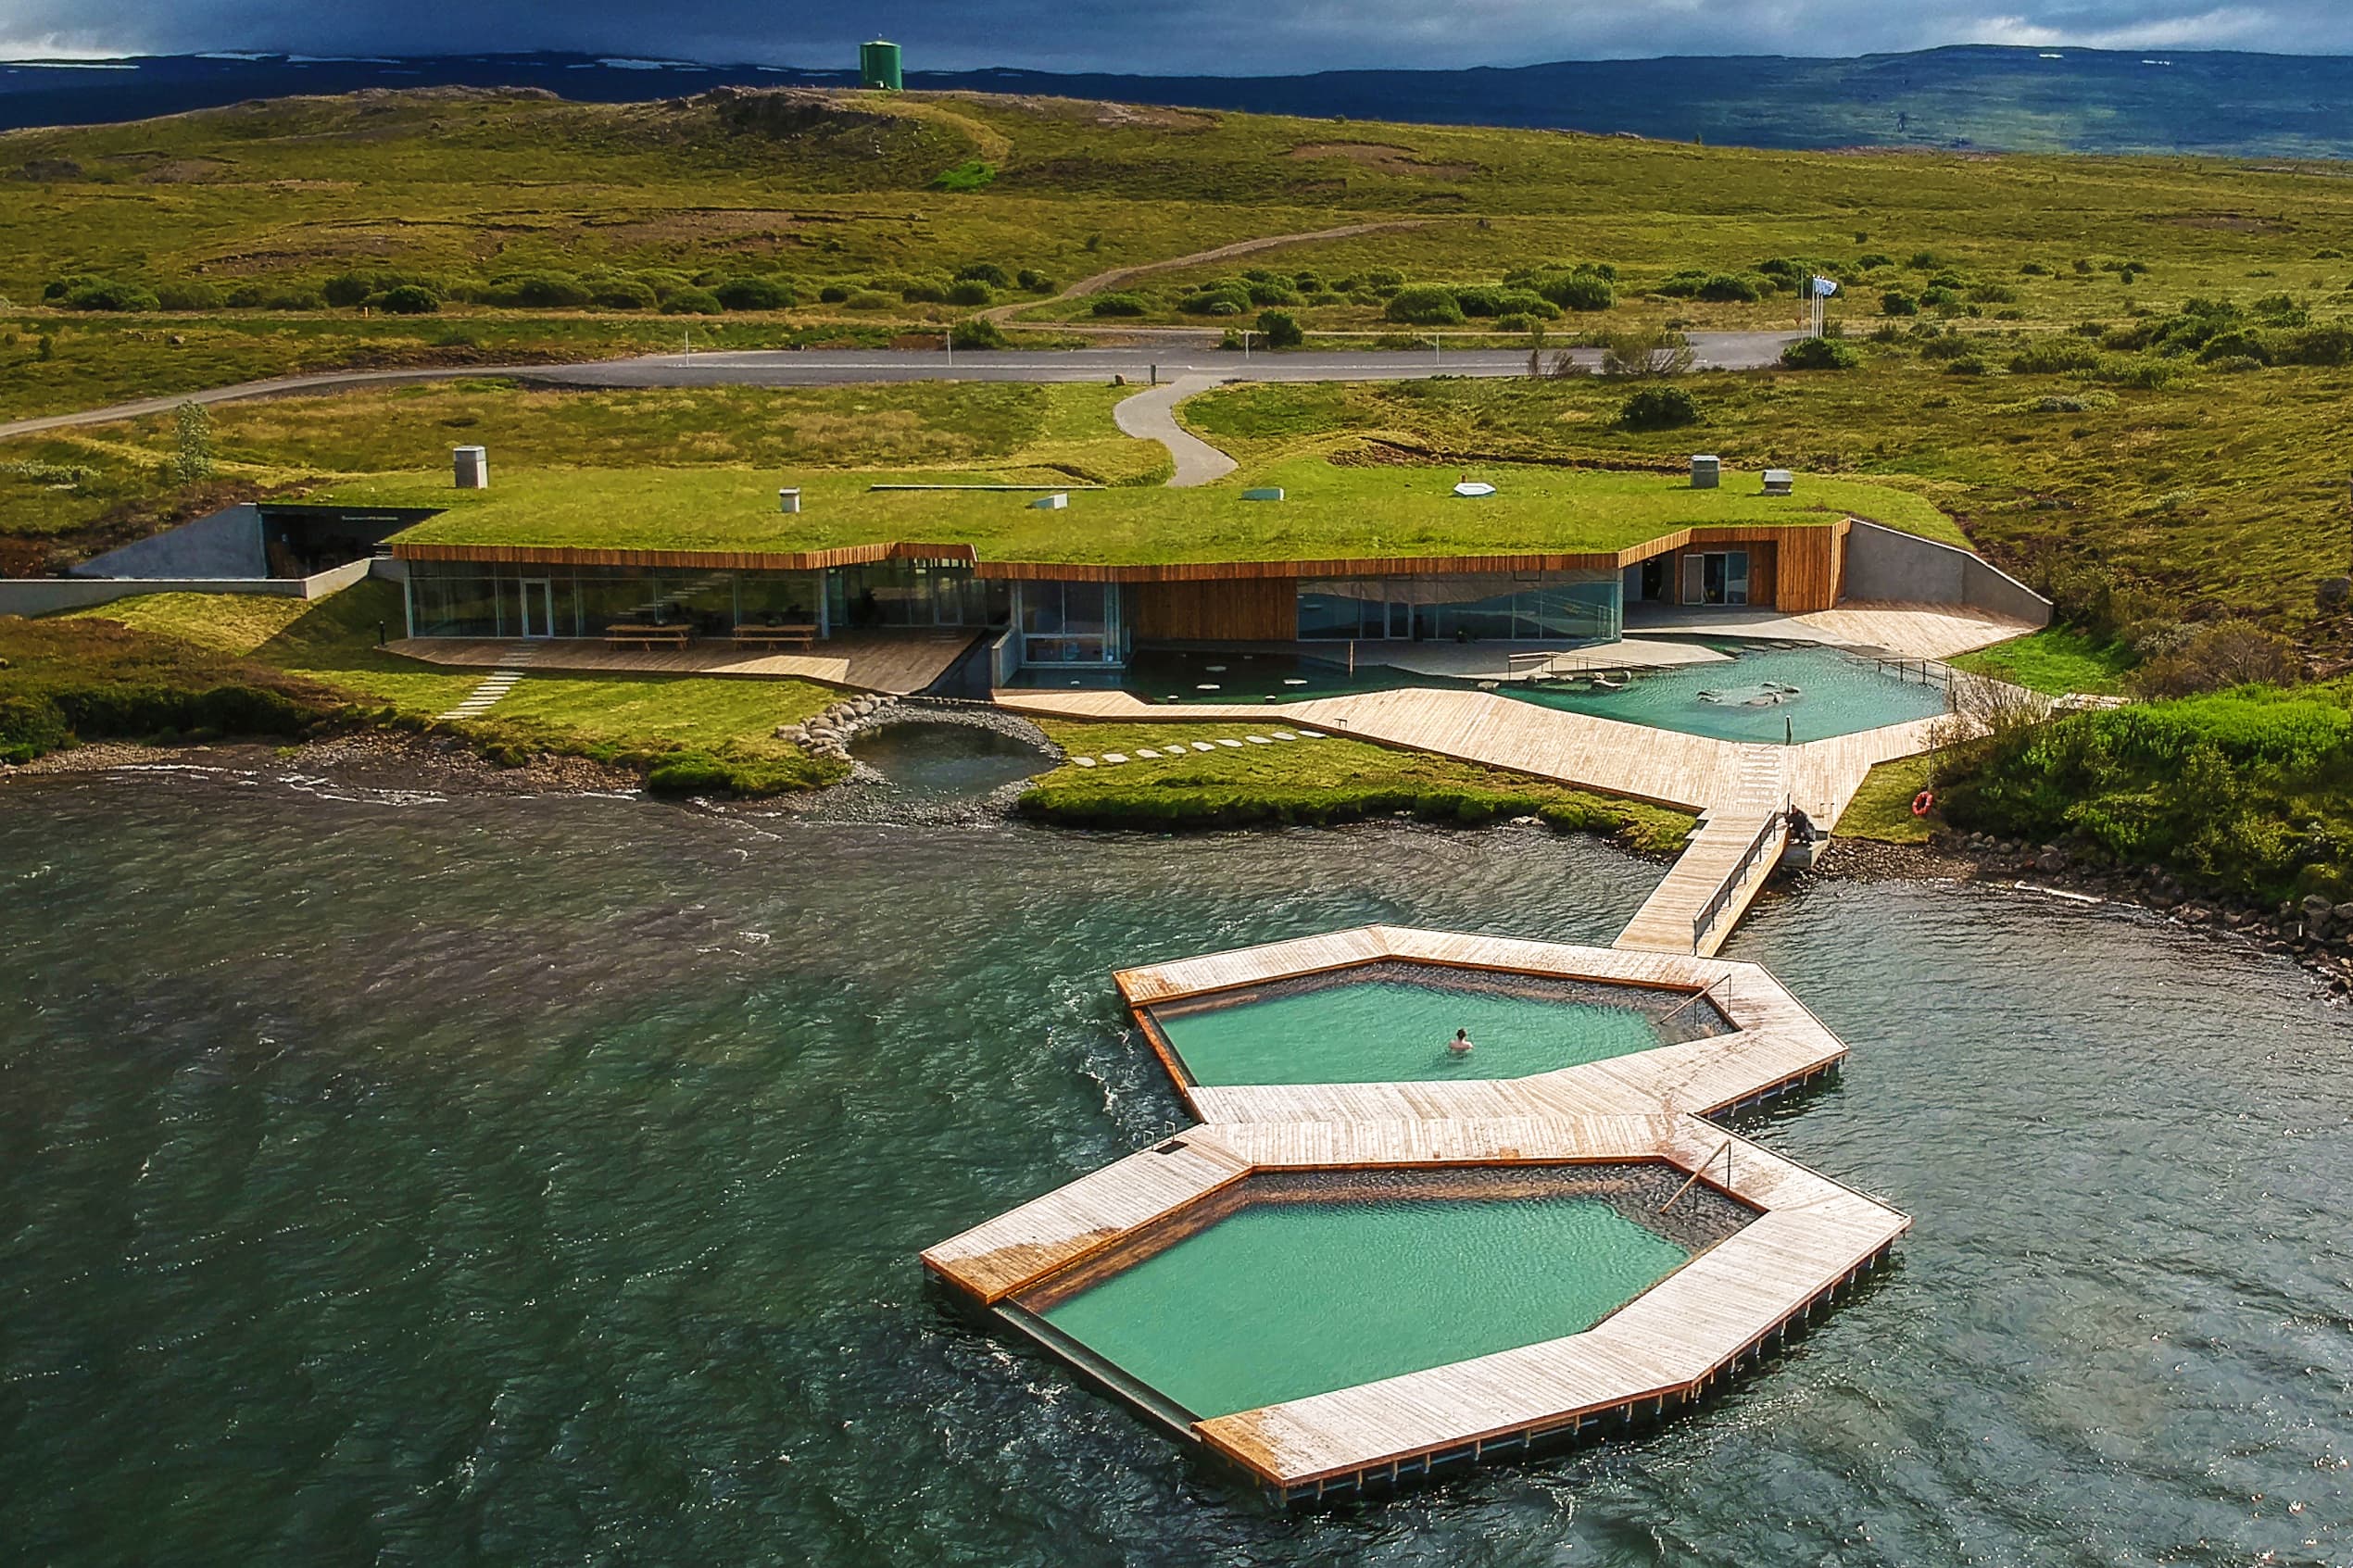 Vok baths in Iceland viewed from overhead - two hexagon shaped pools positioned next to another square pool and small bath